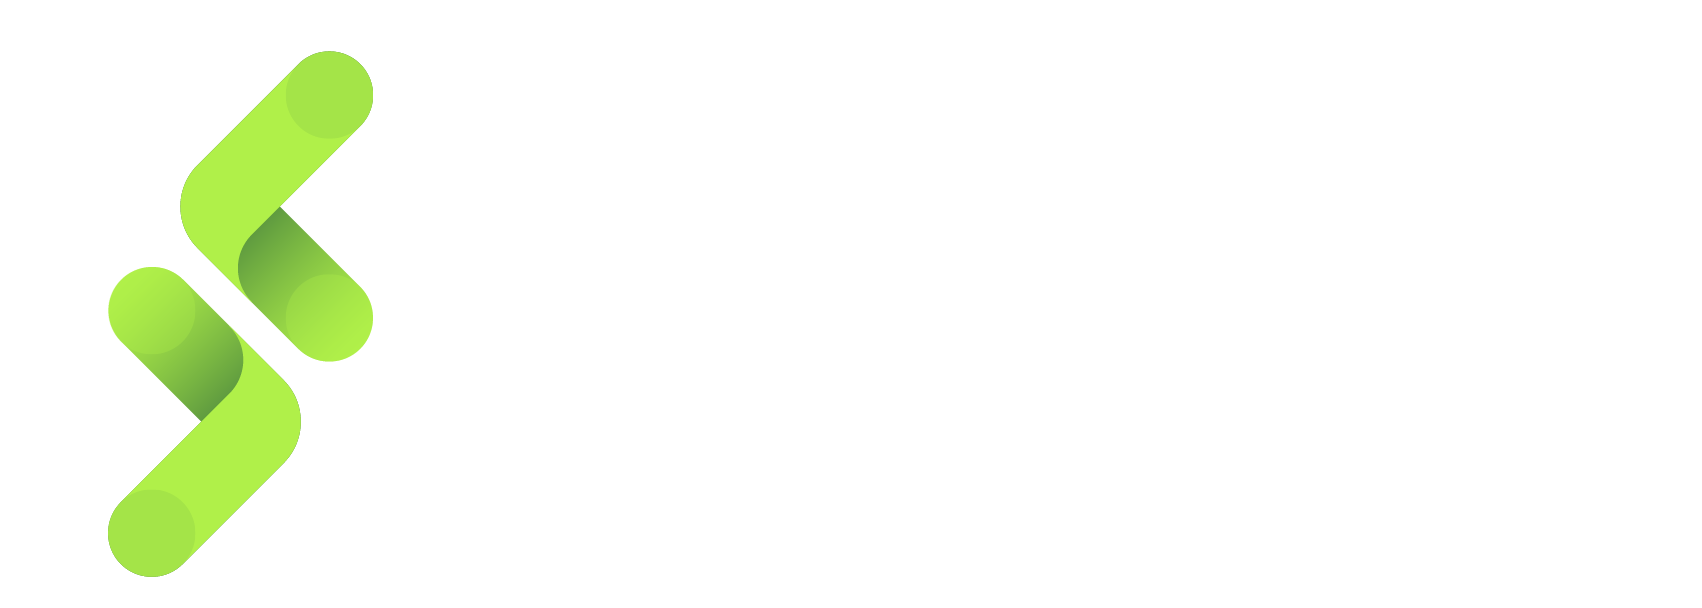 Syslearn